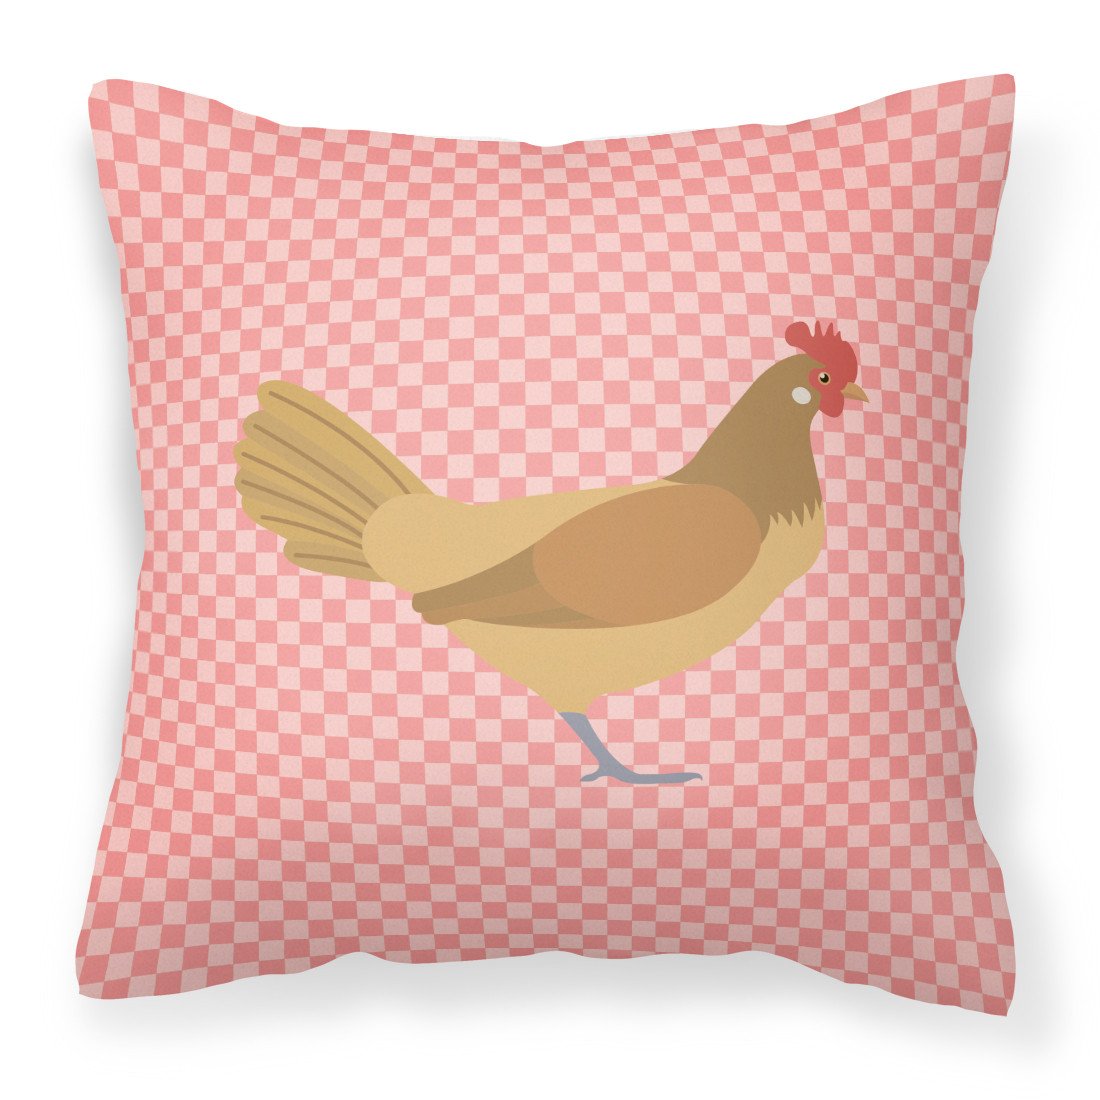 Frisian Friesian Chicken Pink Check Fabric Decorative Pillow BB7832PW1818 by Caroline's Treasures